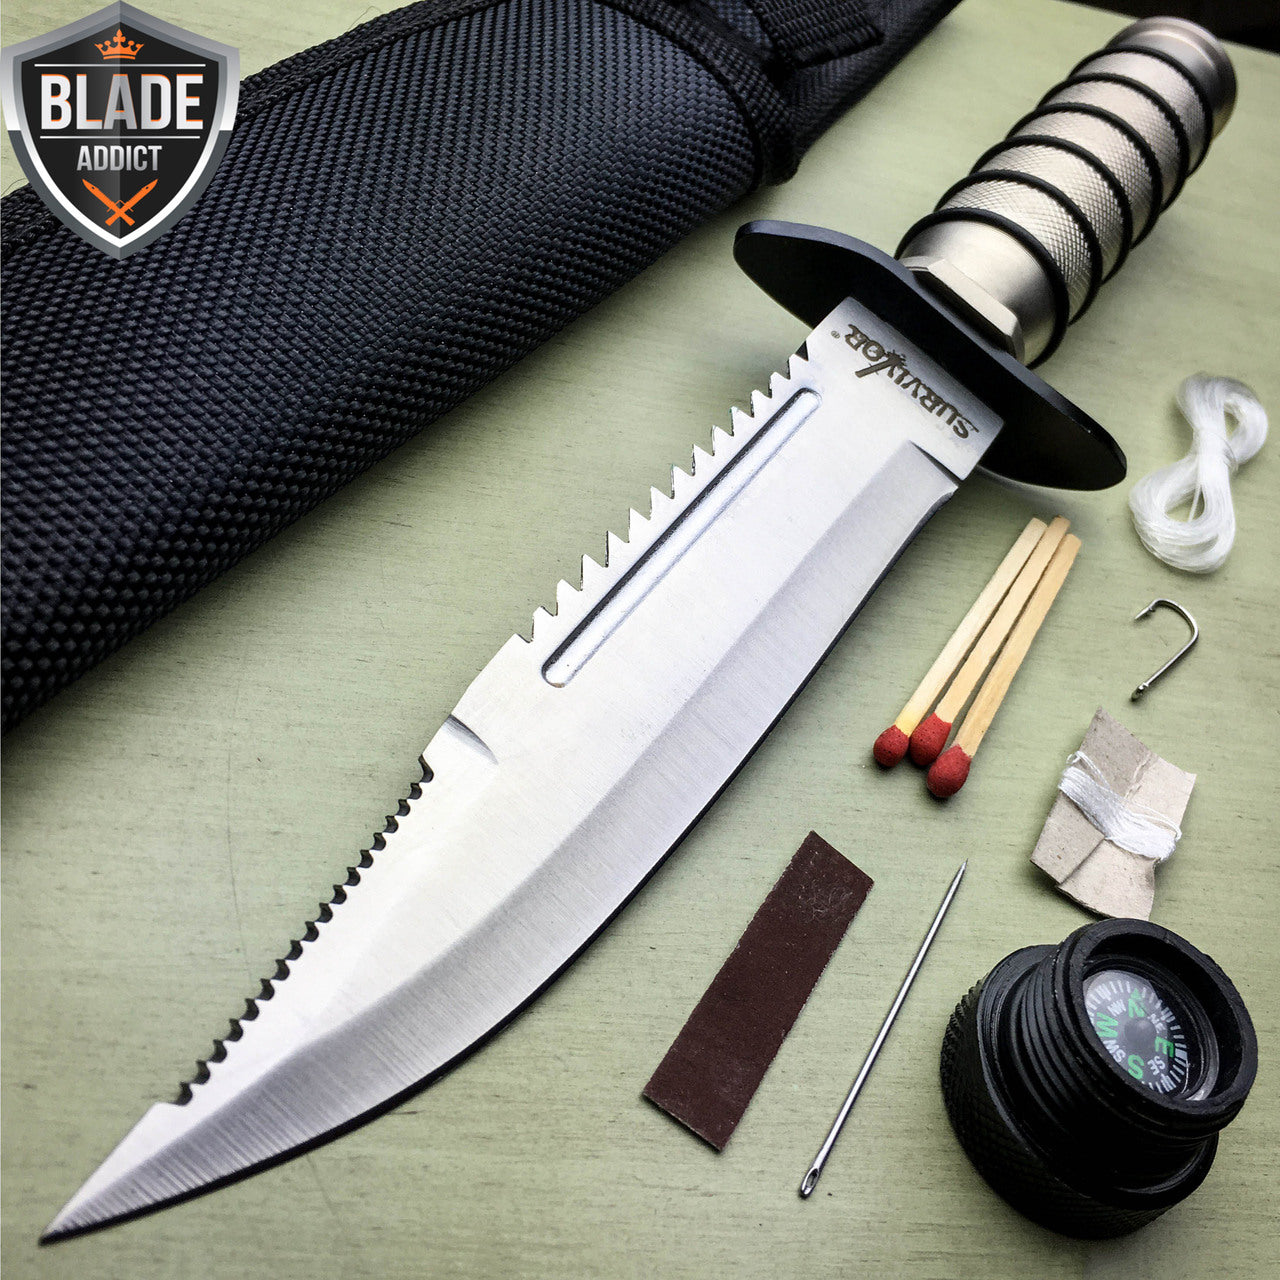 12 Tactical Camping Hunting Rambo Fixed Blade Knife Chrome Bowie +  Survival KIT - MEGAKNIFE